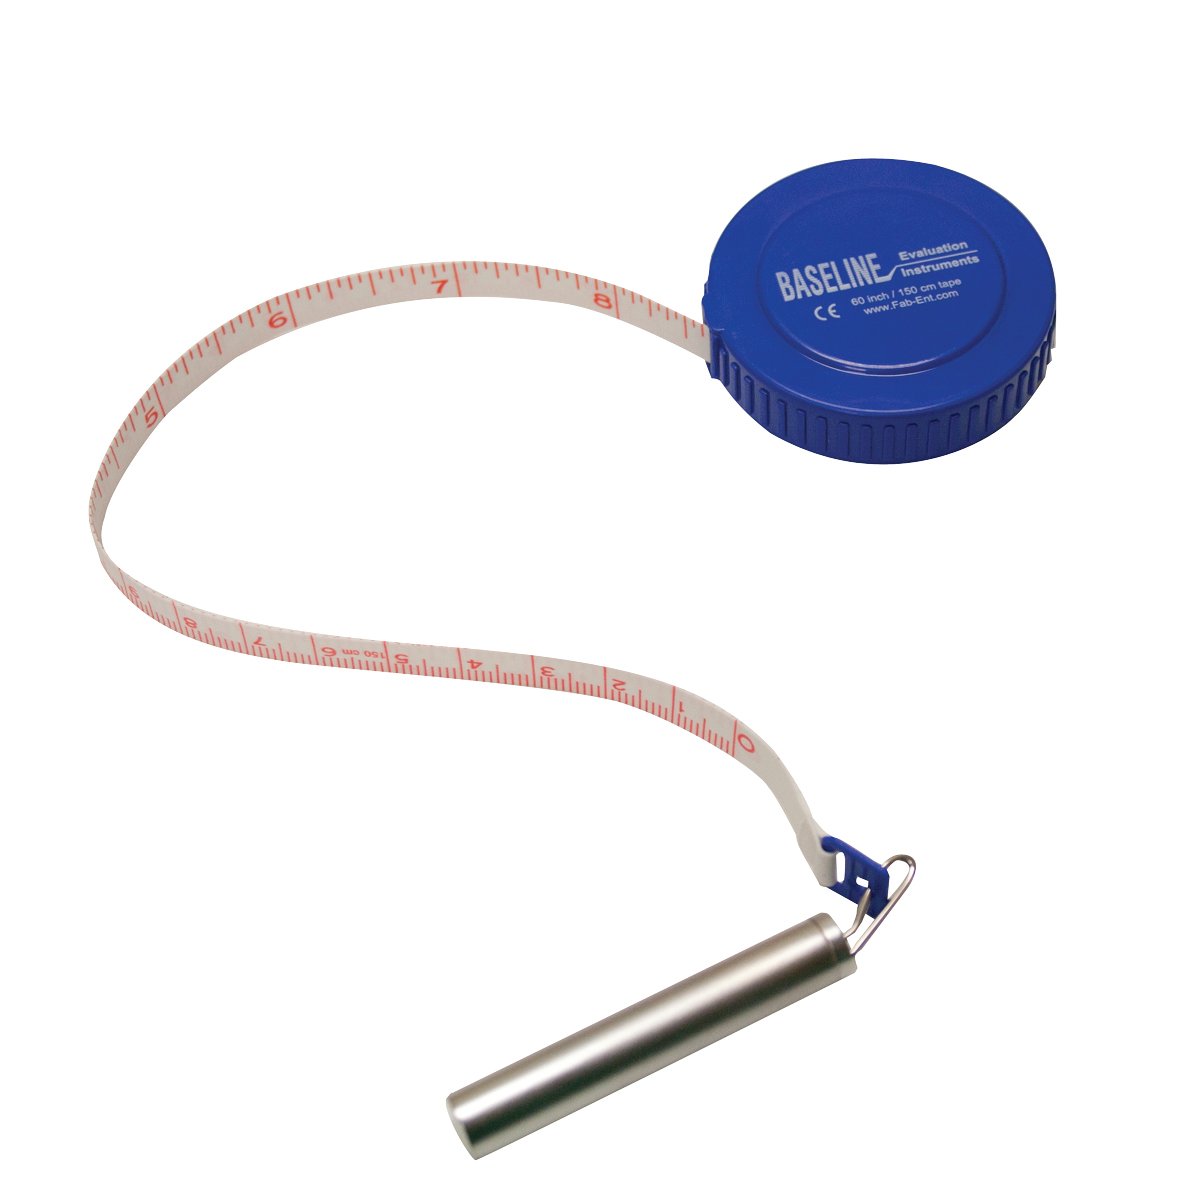 Picture of Baseline 12-1204-25 120 in. Measurement Tape with Gulick Attachment